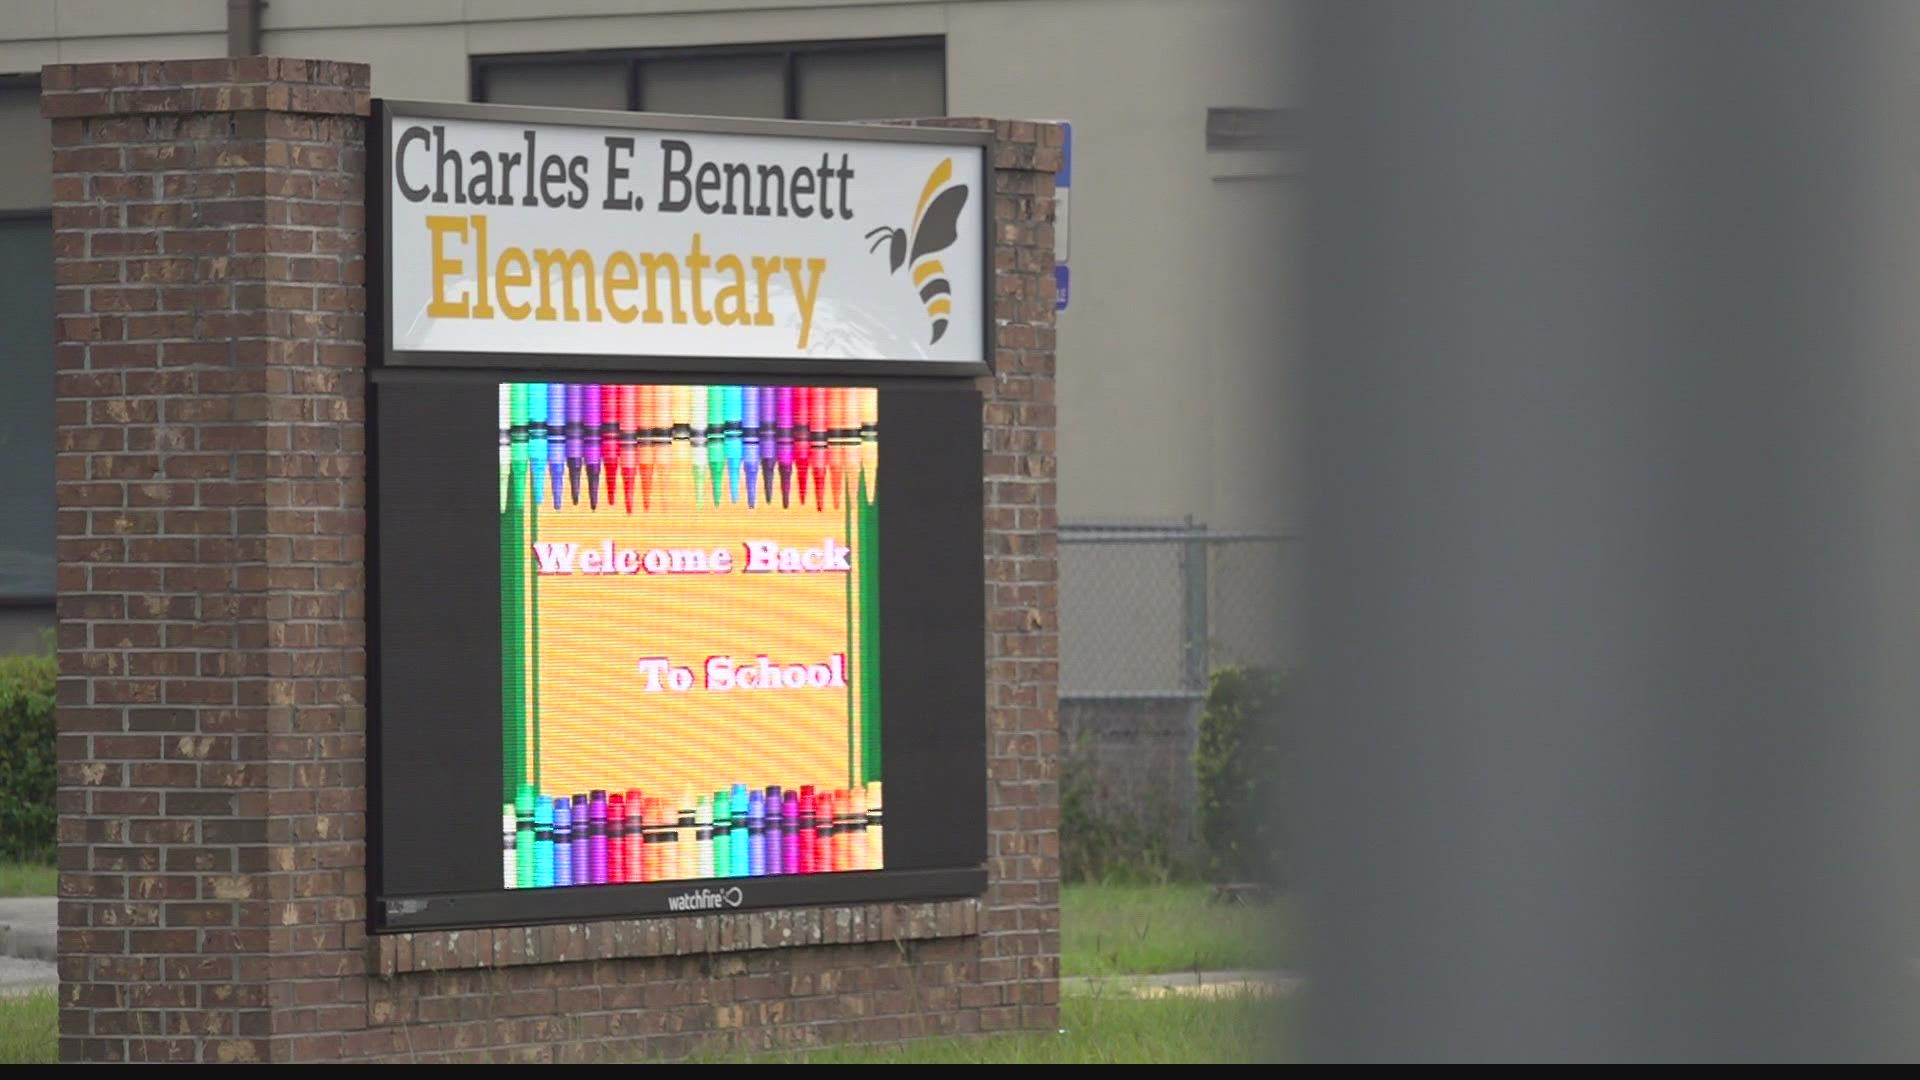 One mother says he daughter will not be returning to Charles E. Bennett Elementary.